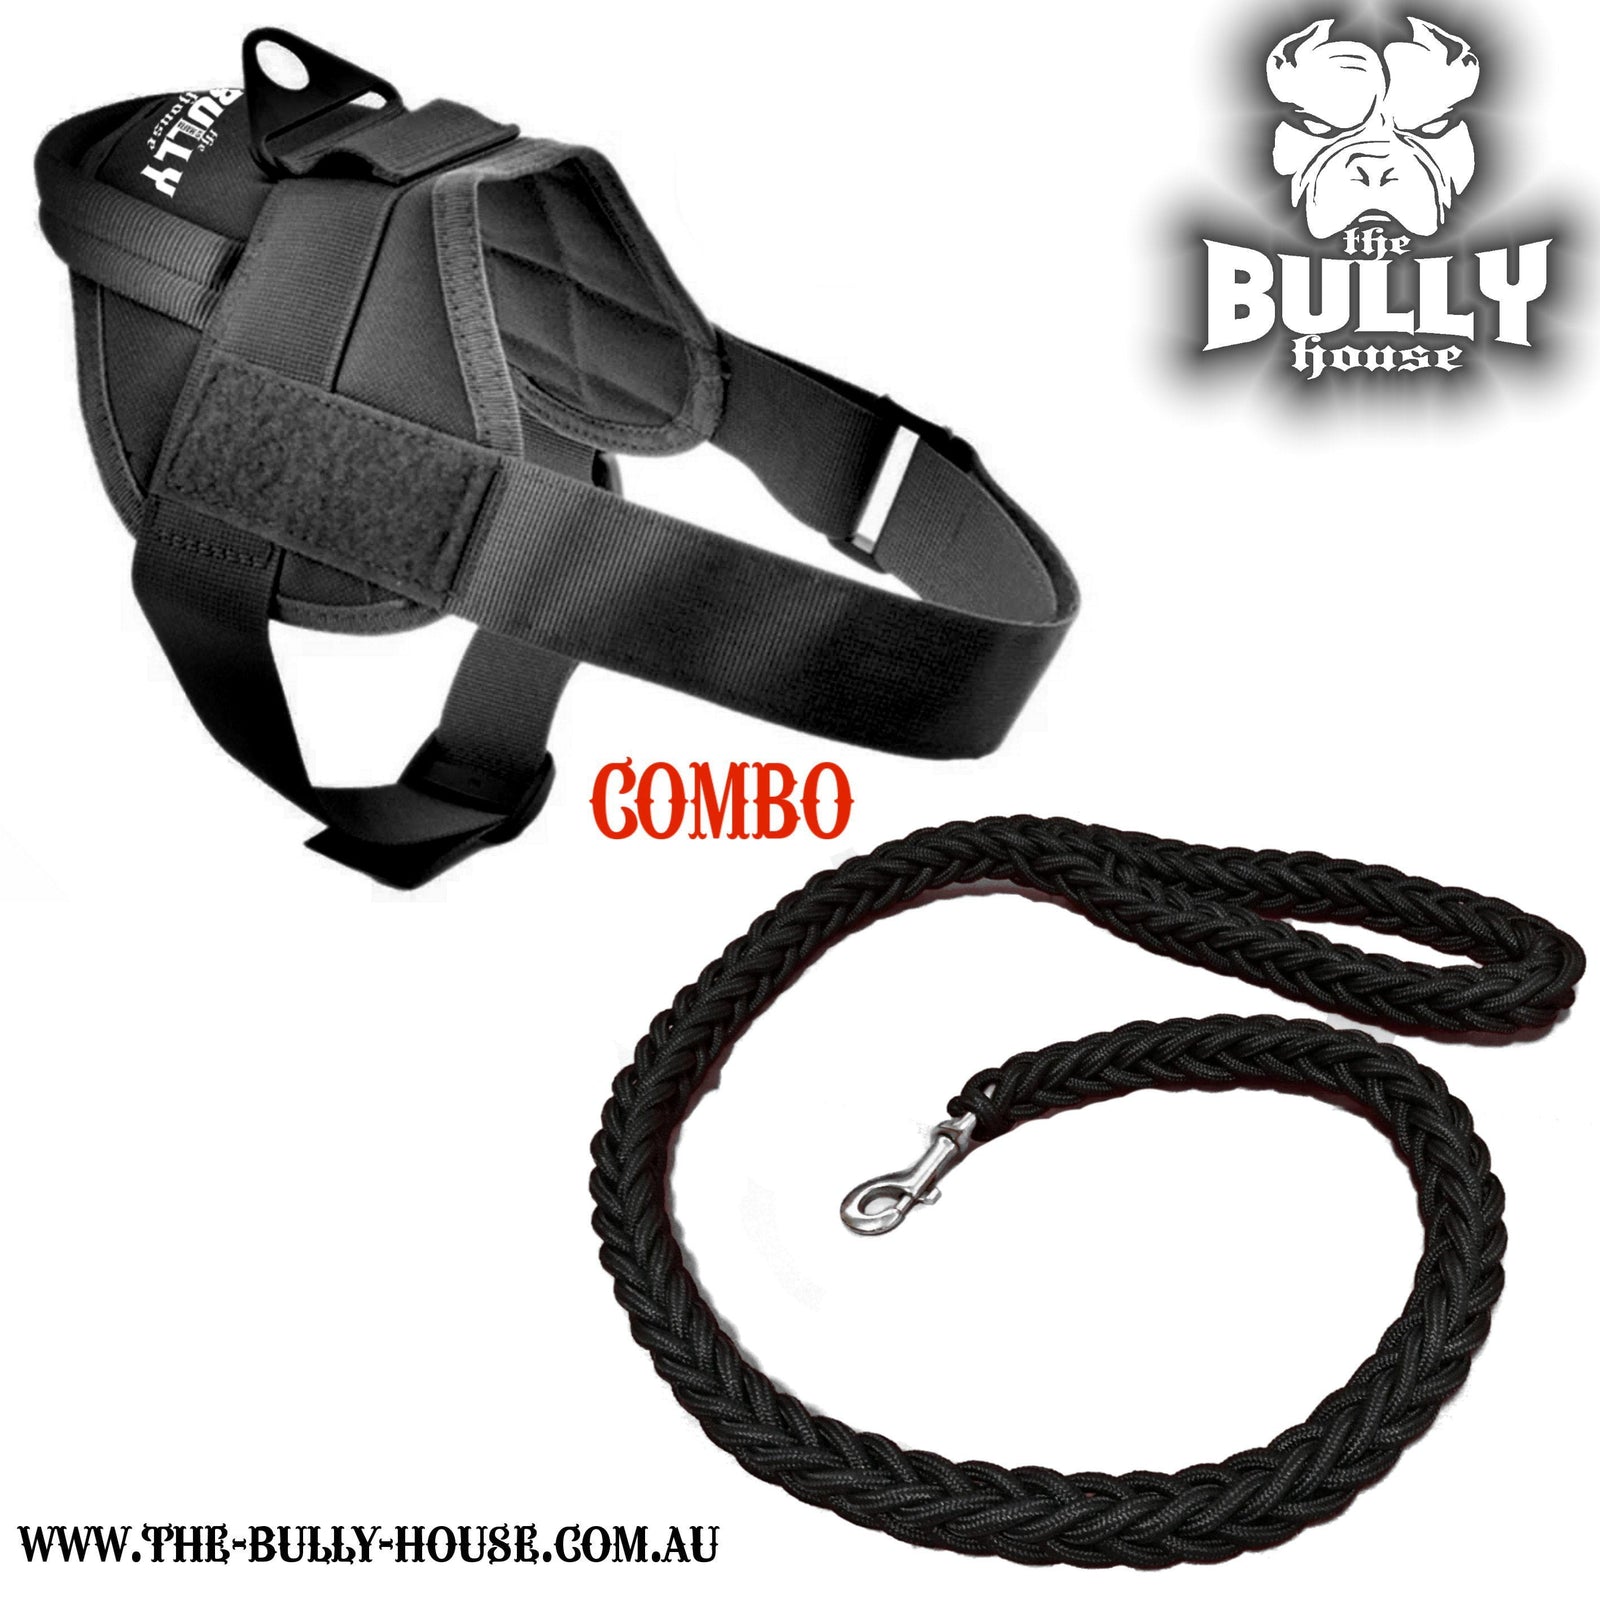 QUICK FIT HARNESS and LEASH COMBO